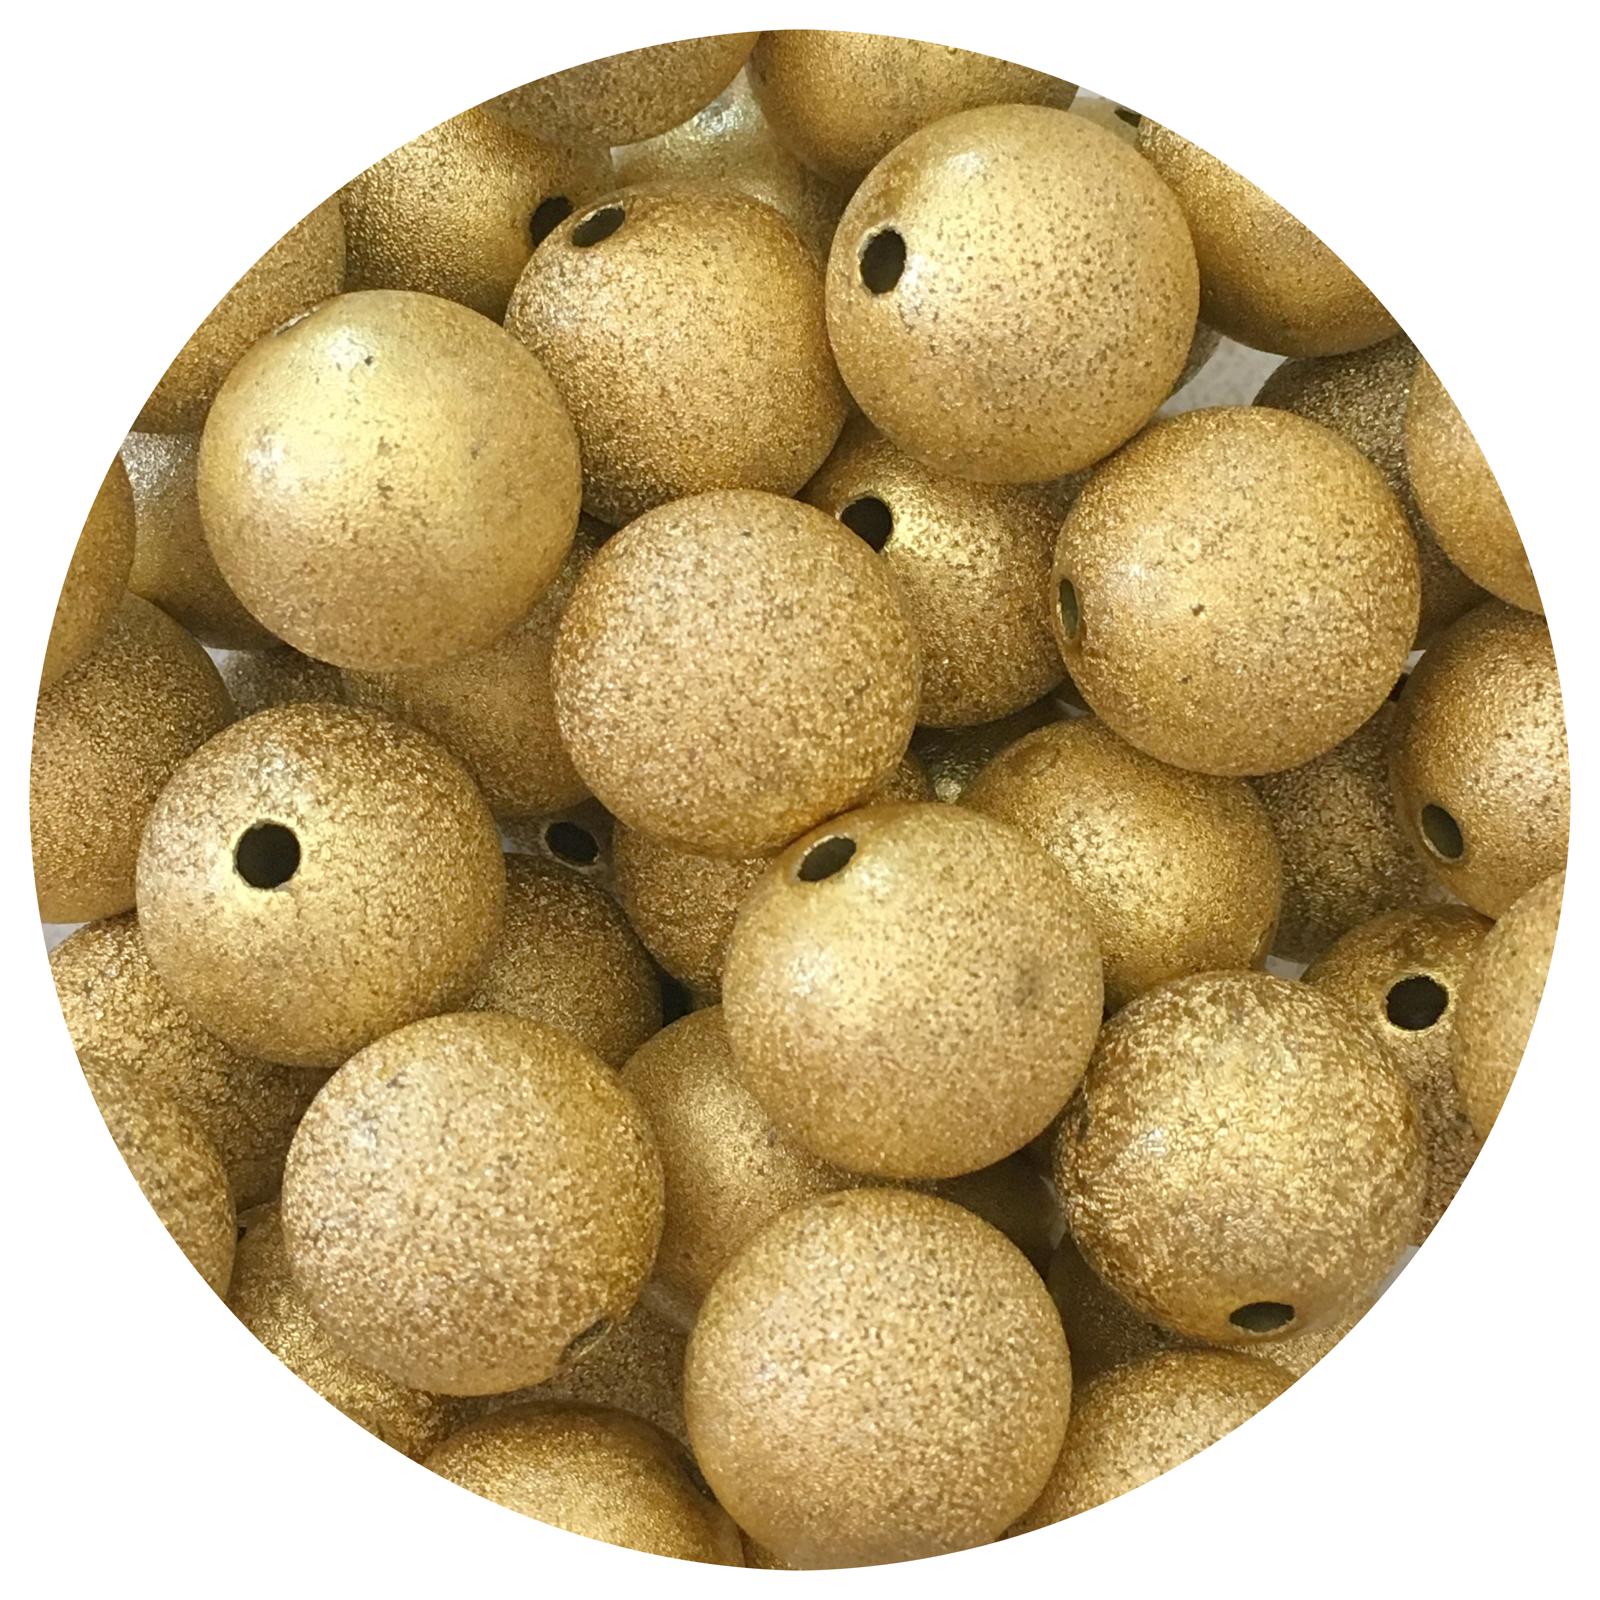 20mm Gold Stardust Round Acrylic Beads - 5 Beads